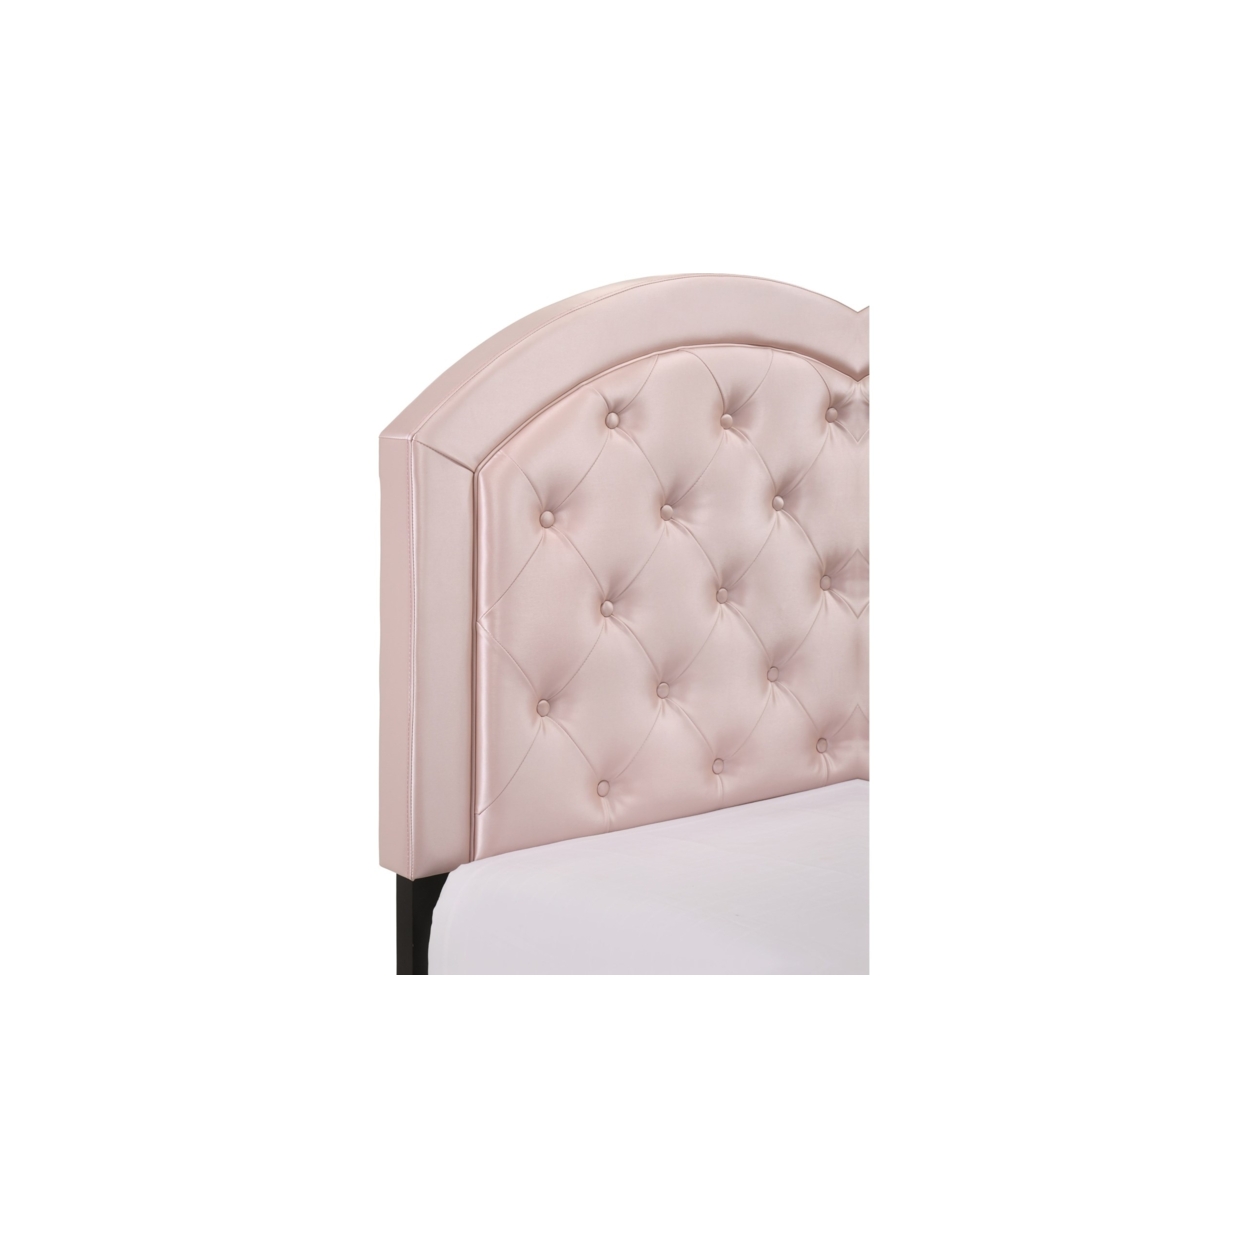 Twin Platform Bed With Curved Button Tufted Headboard, Pink- Saltoro Sherpi